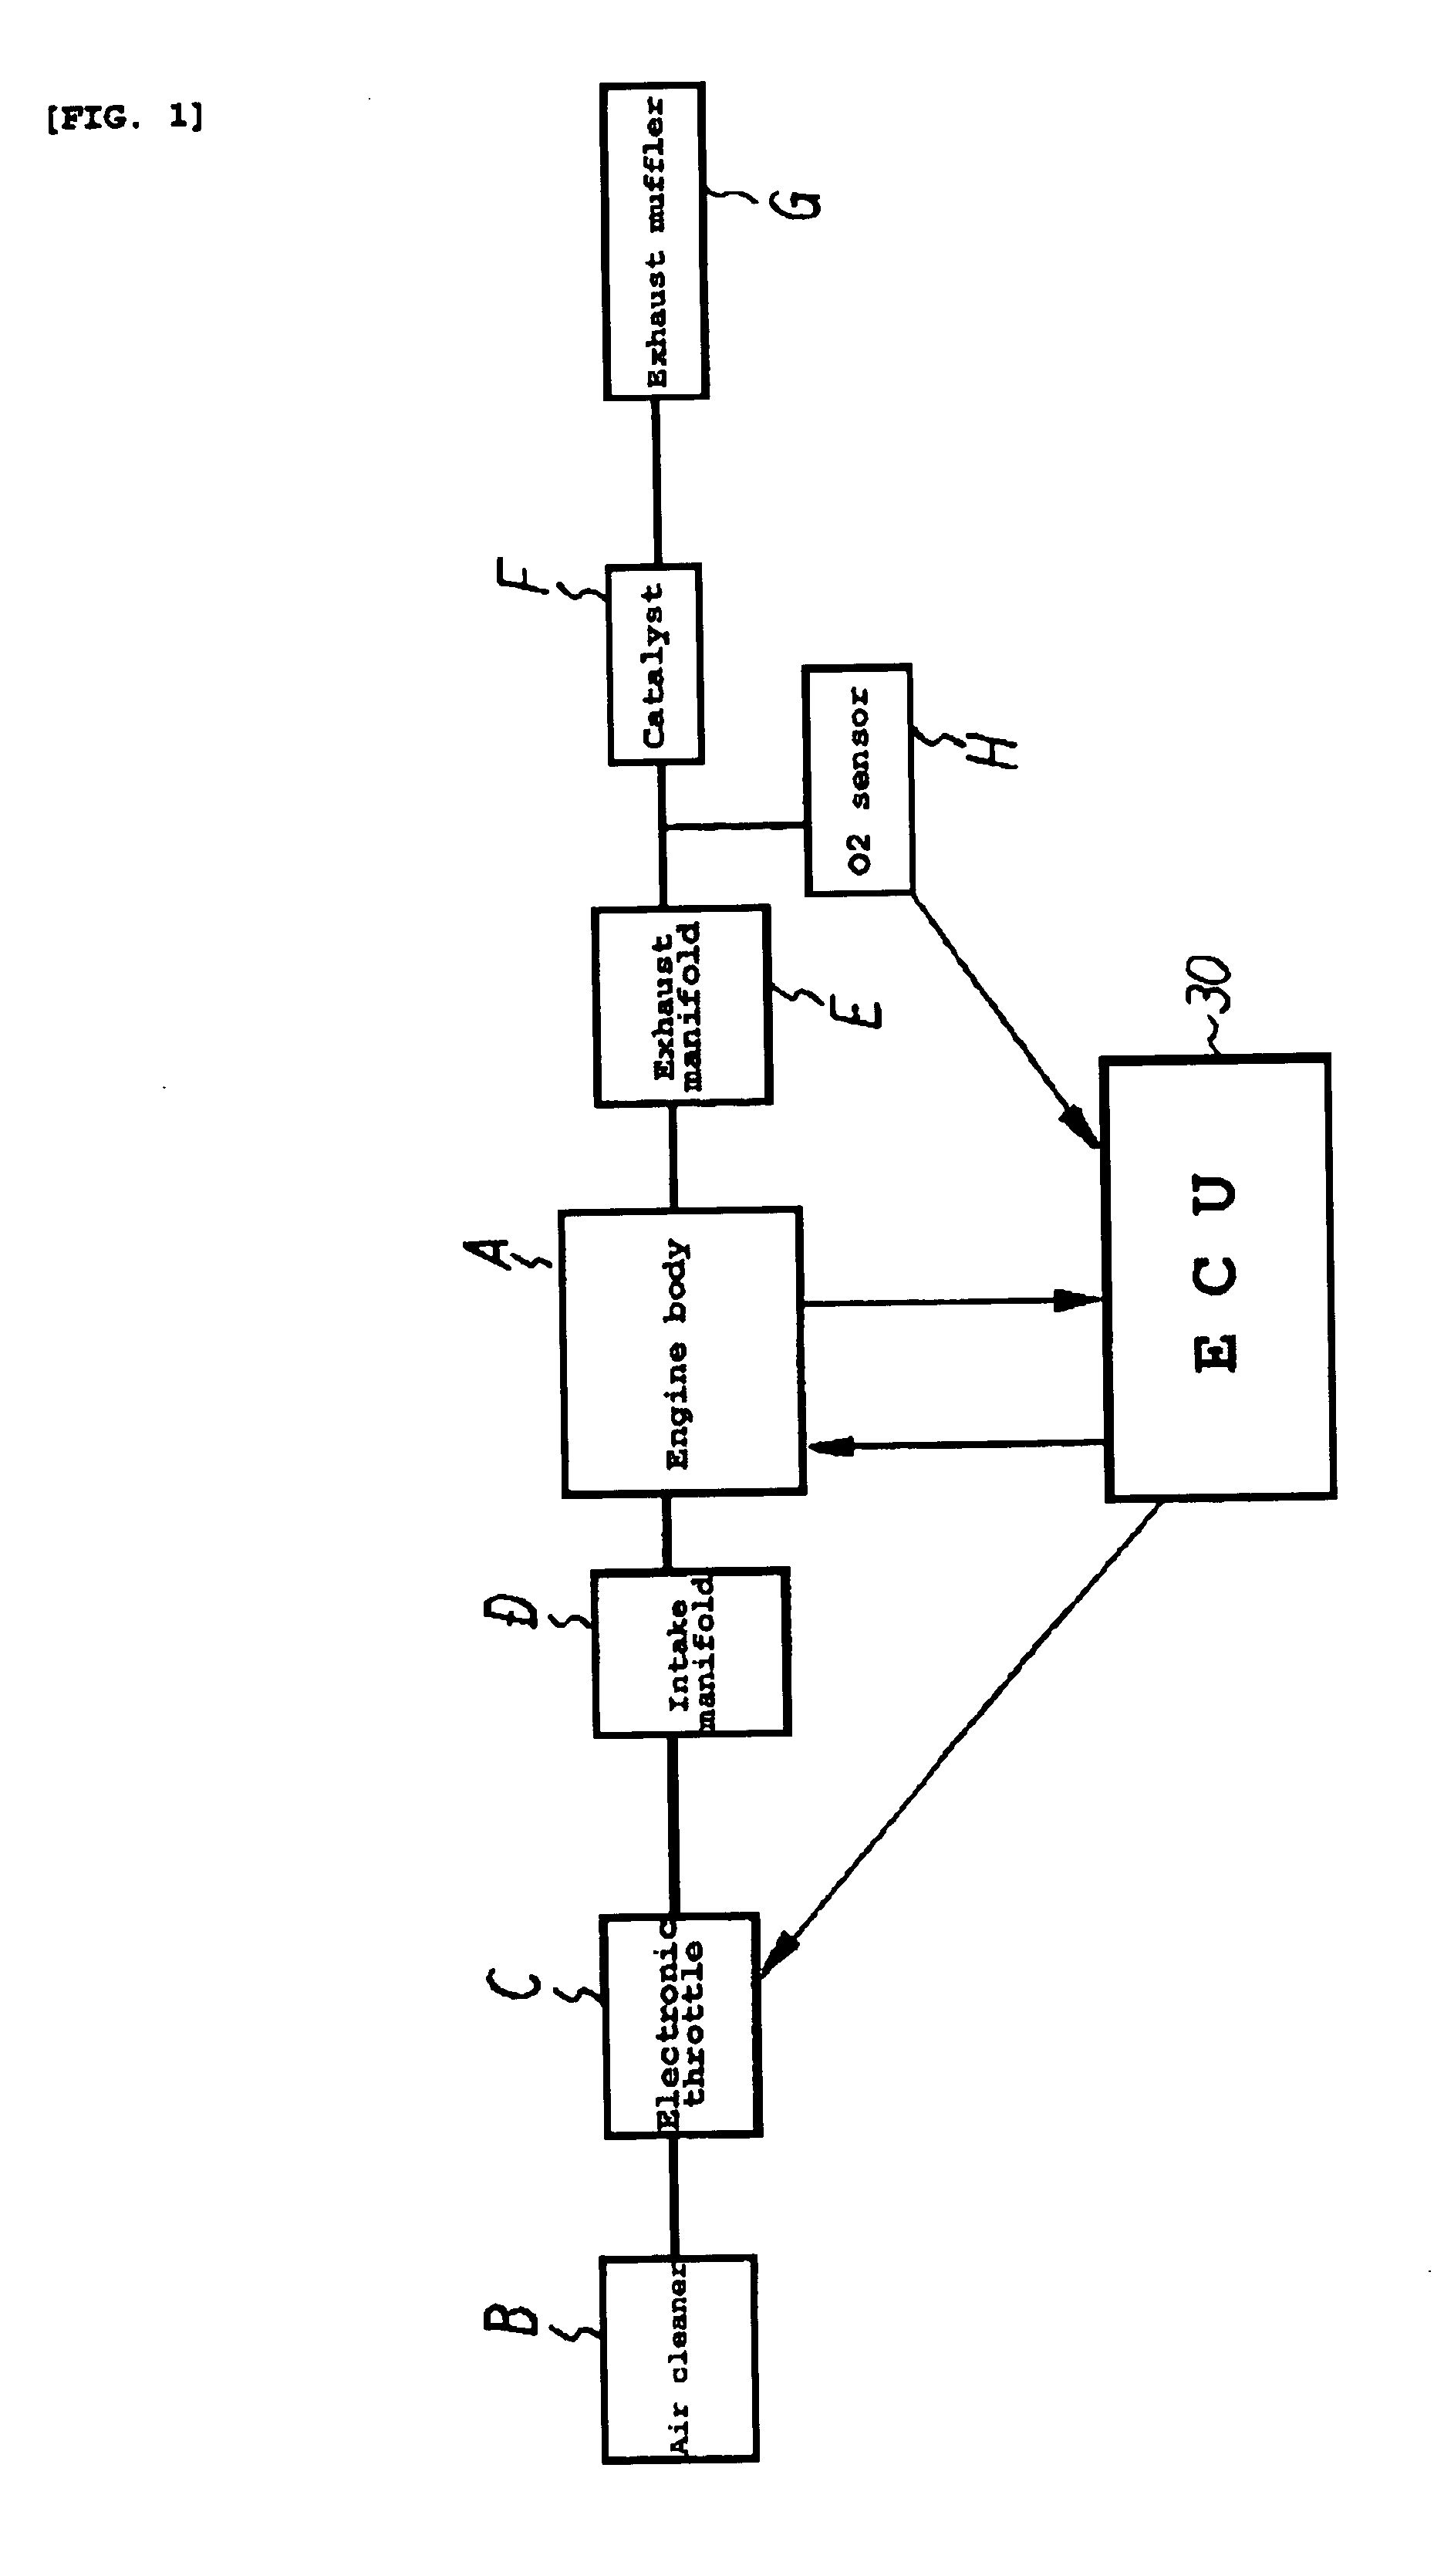 Control system for engine